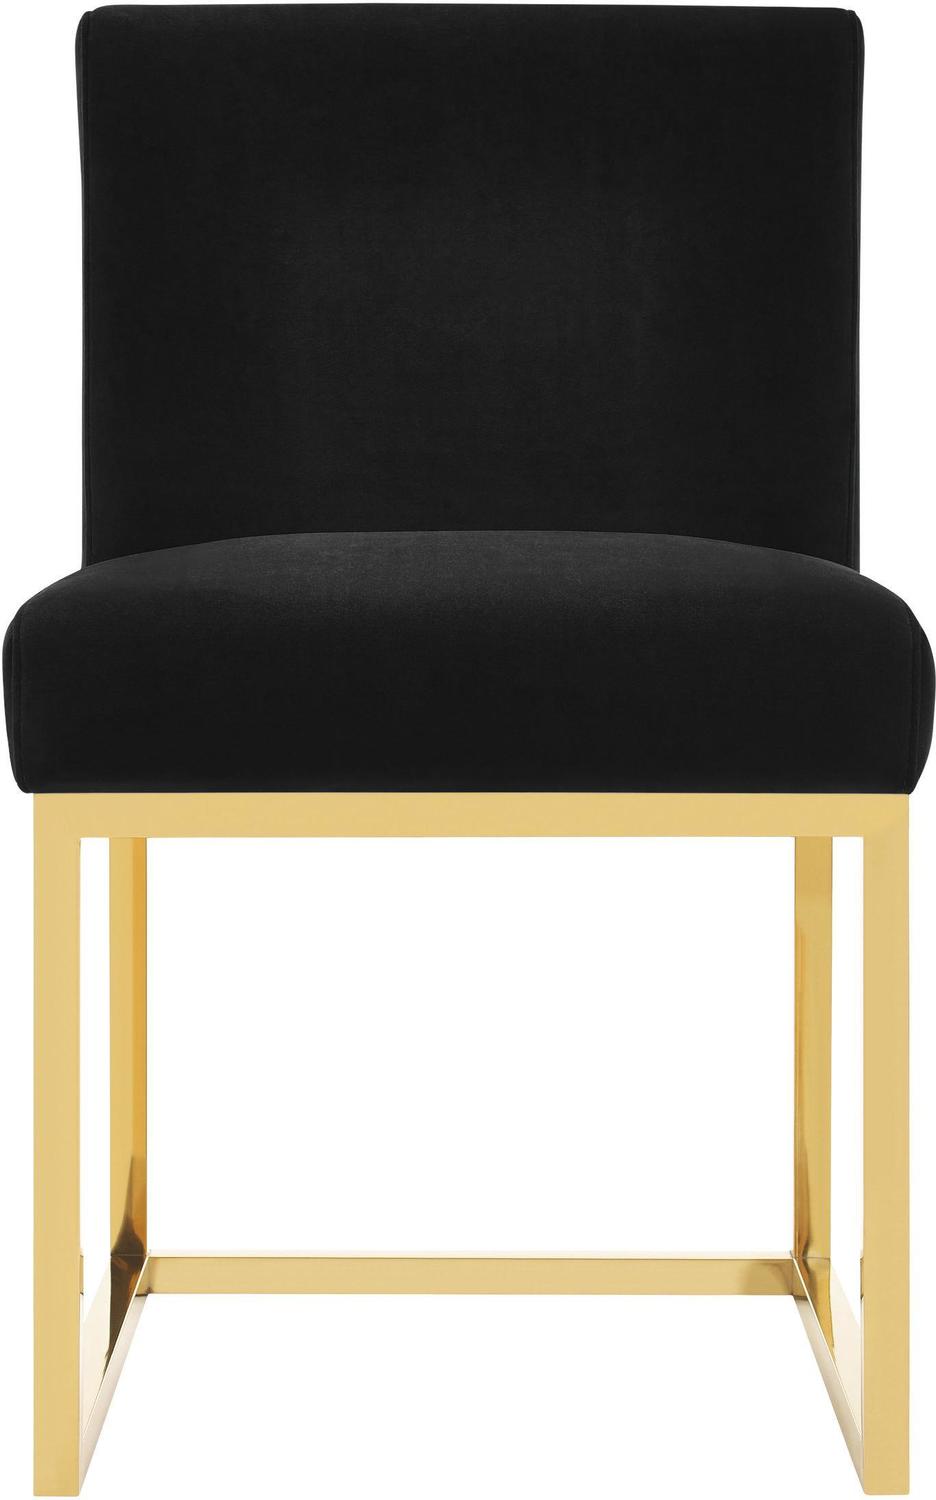 small lounge chair for bedroom Contemporary Design Furniture Dining Chairs Black